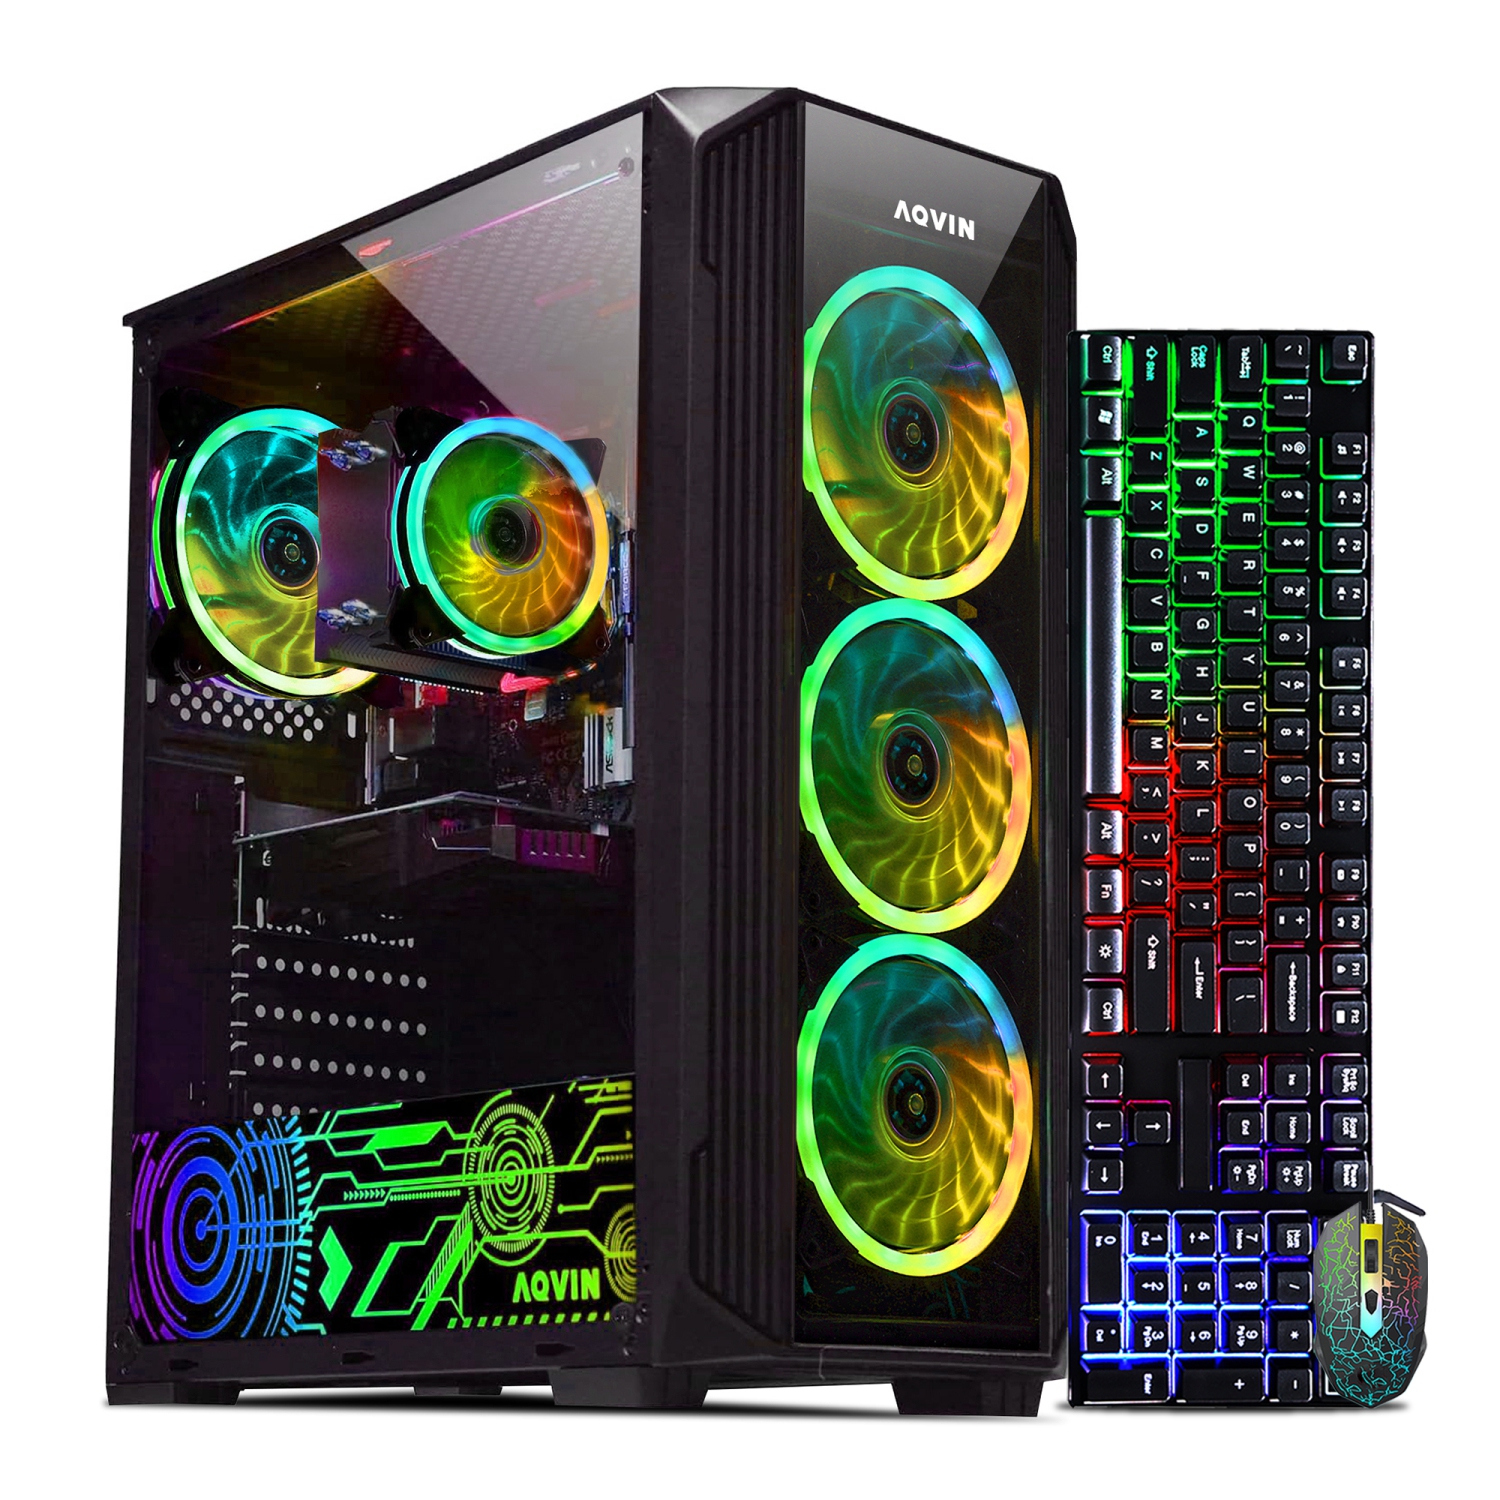 Gaming PC Tower ZForce- Intel Core i7 Processor upto 4.0Ghz 32GB DDR4 RAM 2TB SSD GeForce RTX 3060 12GB DDR6 HDMI WIFI Windows 10 Pro RGB Gaming keyboard Mouse- Only at Best Buy